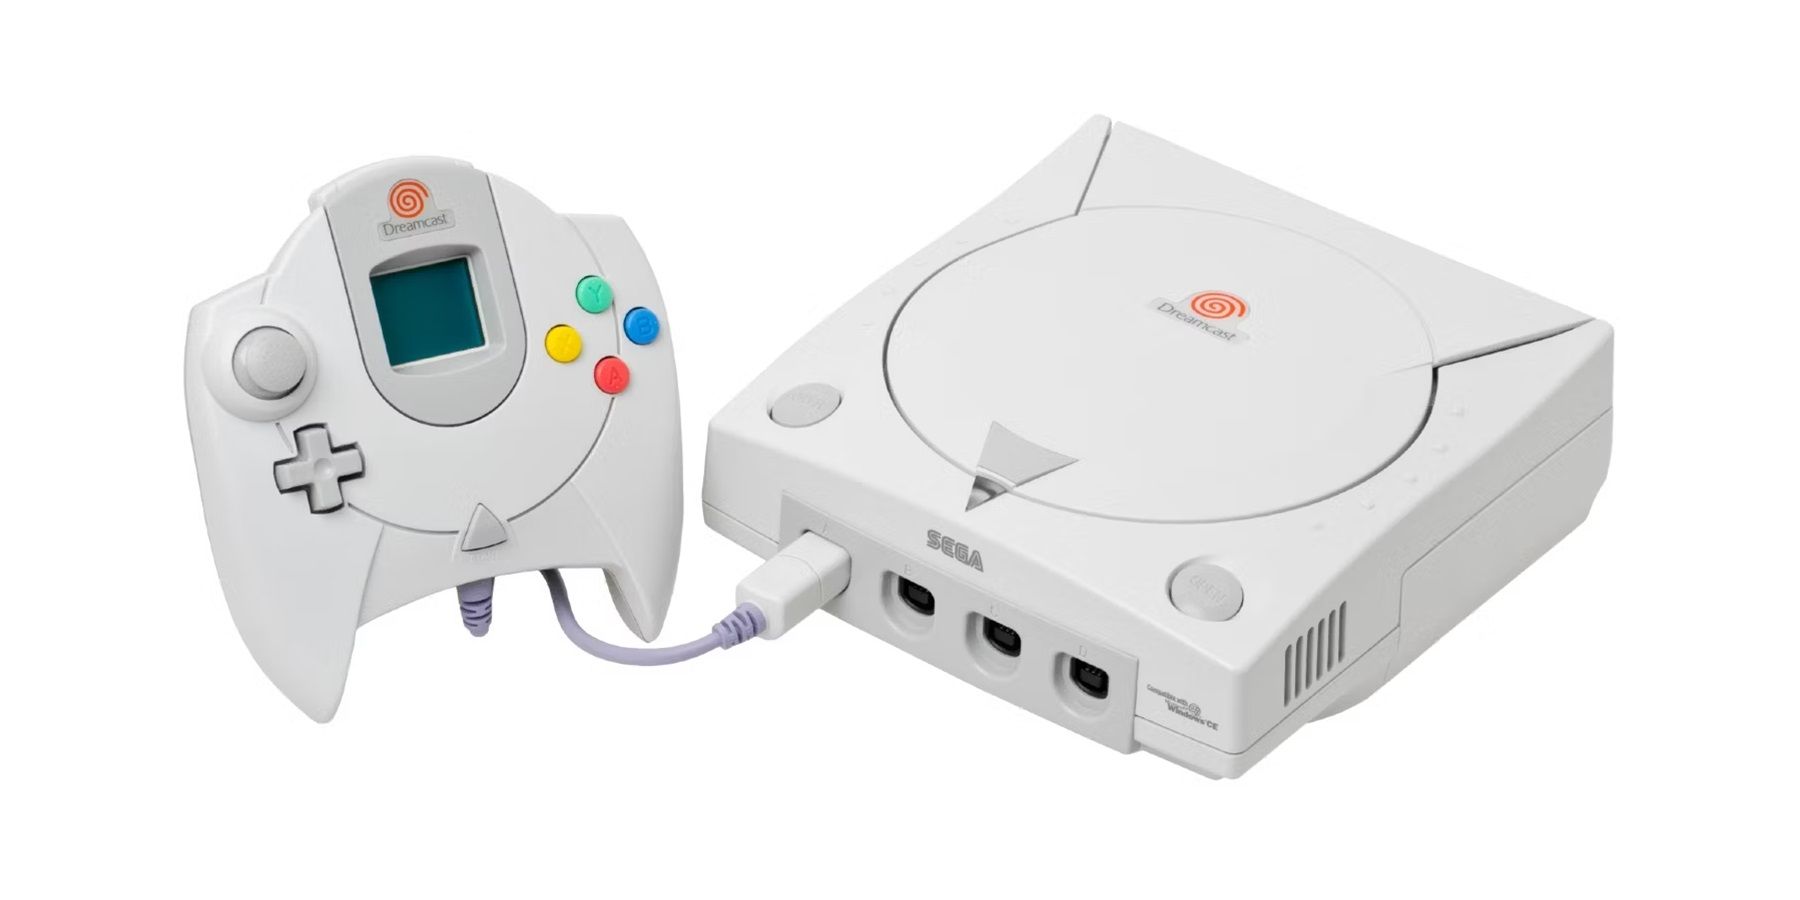 forgotten dreamcast game is making a comeback on may 9